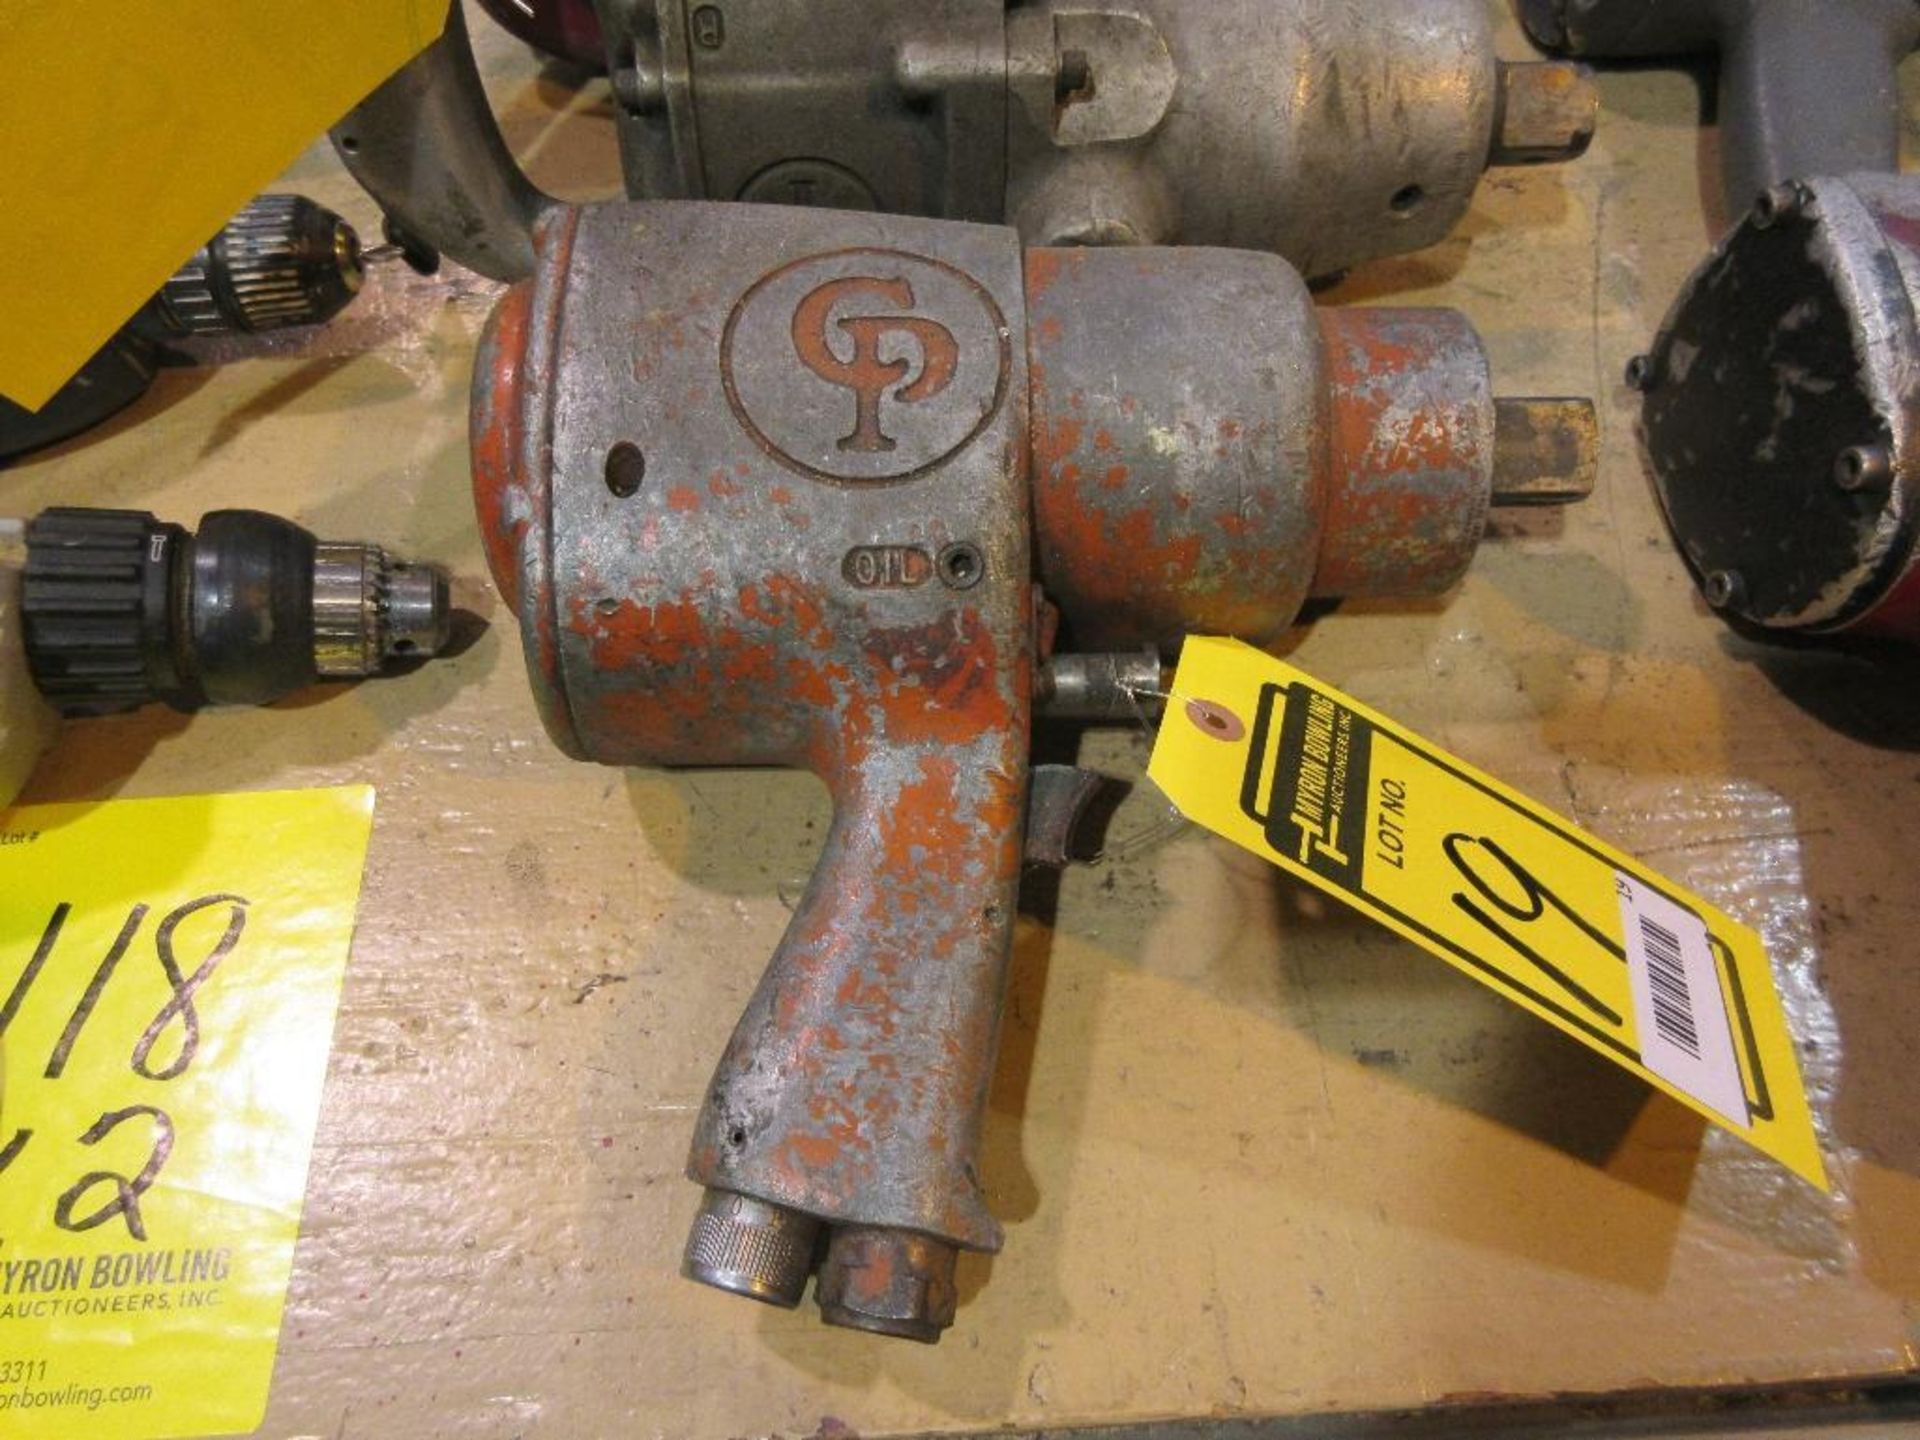 CP 1 IN. PNEUMATIC IMPACT WRENCH